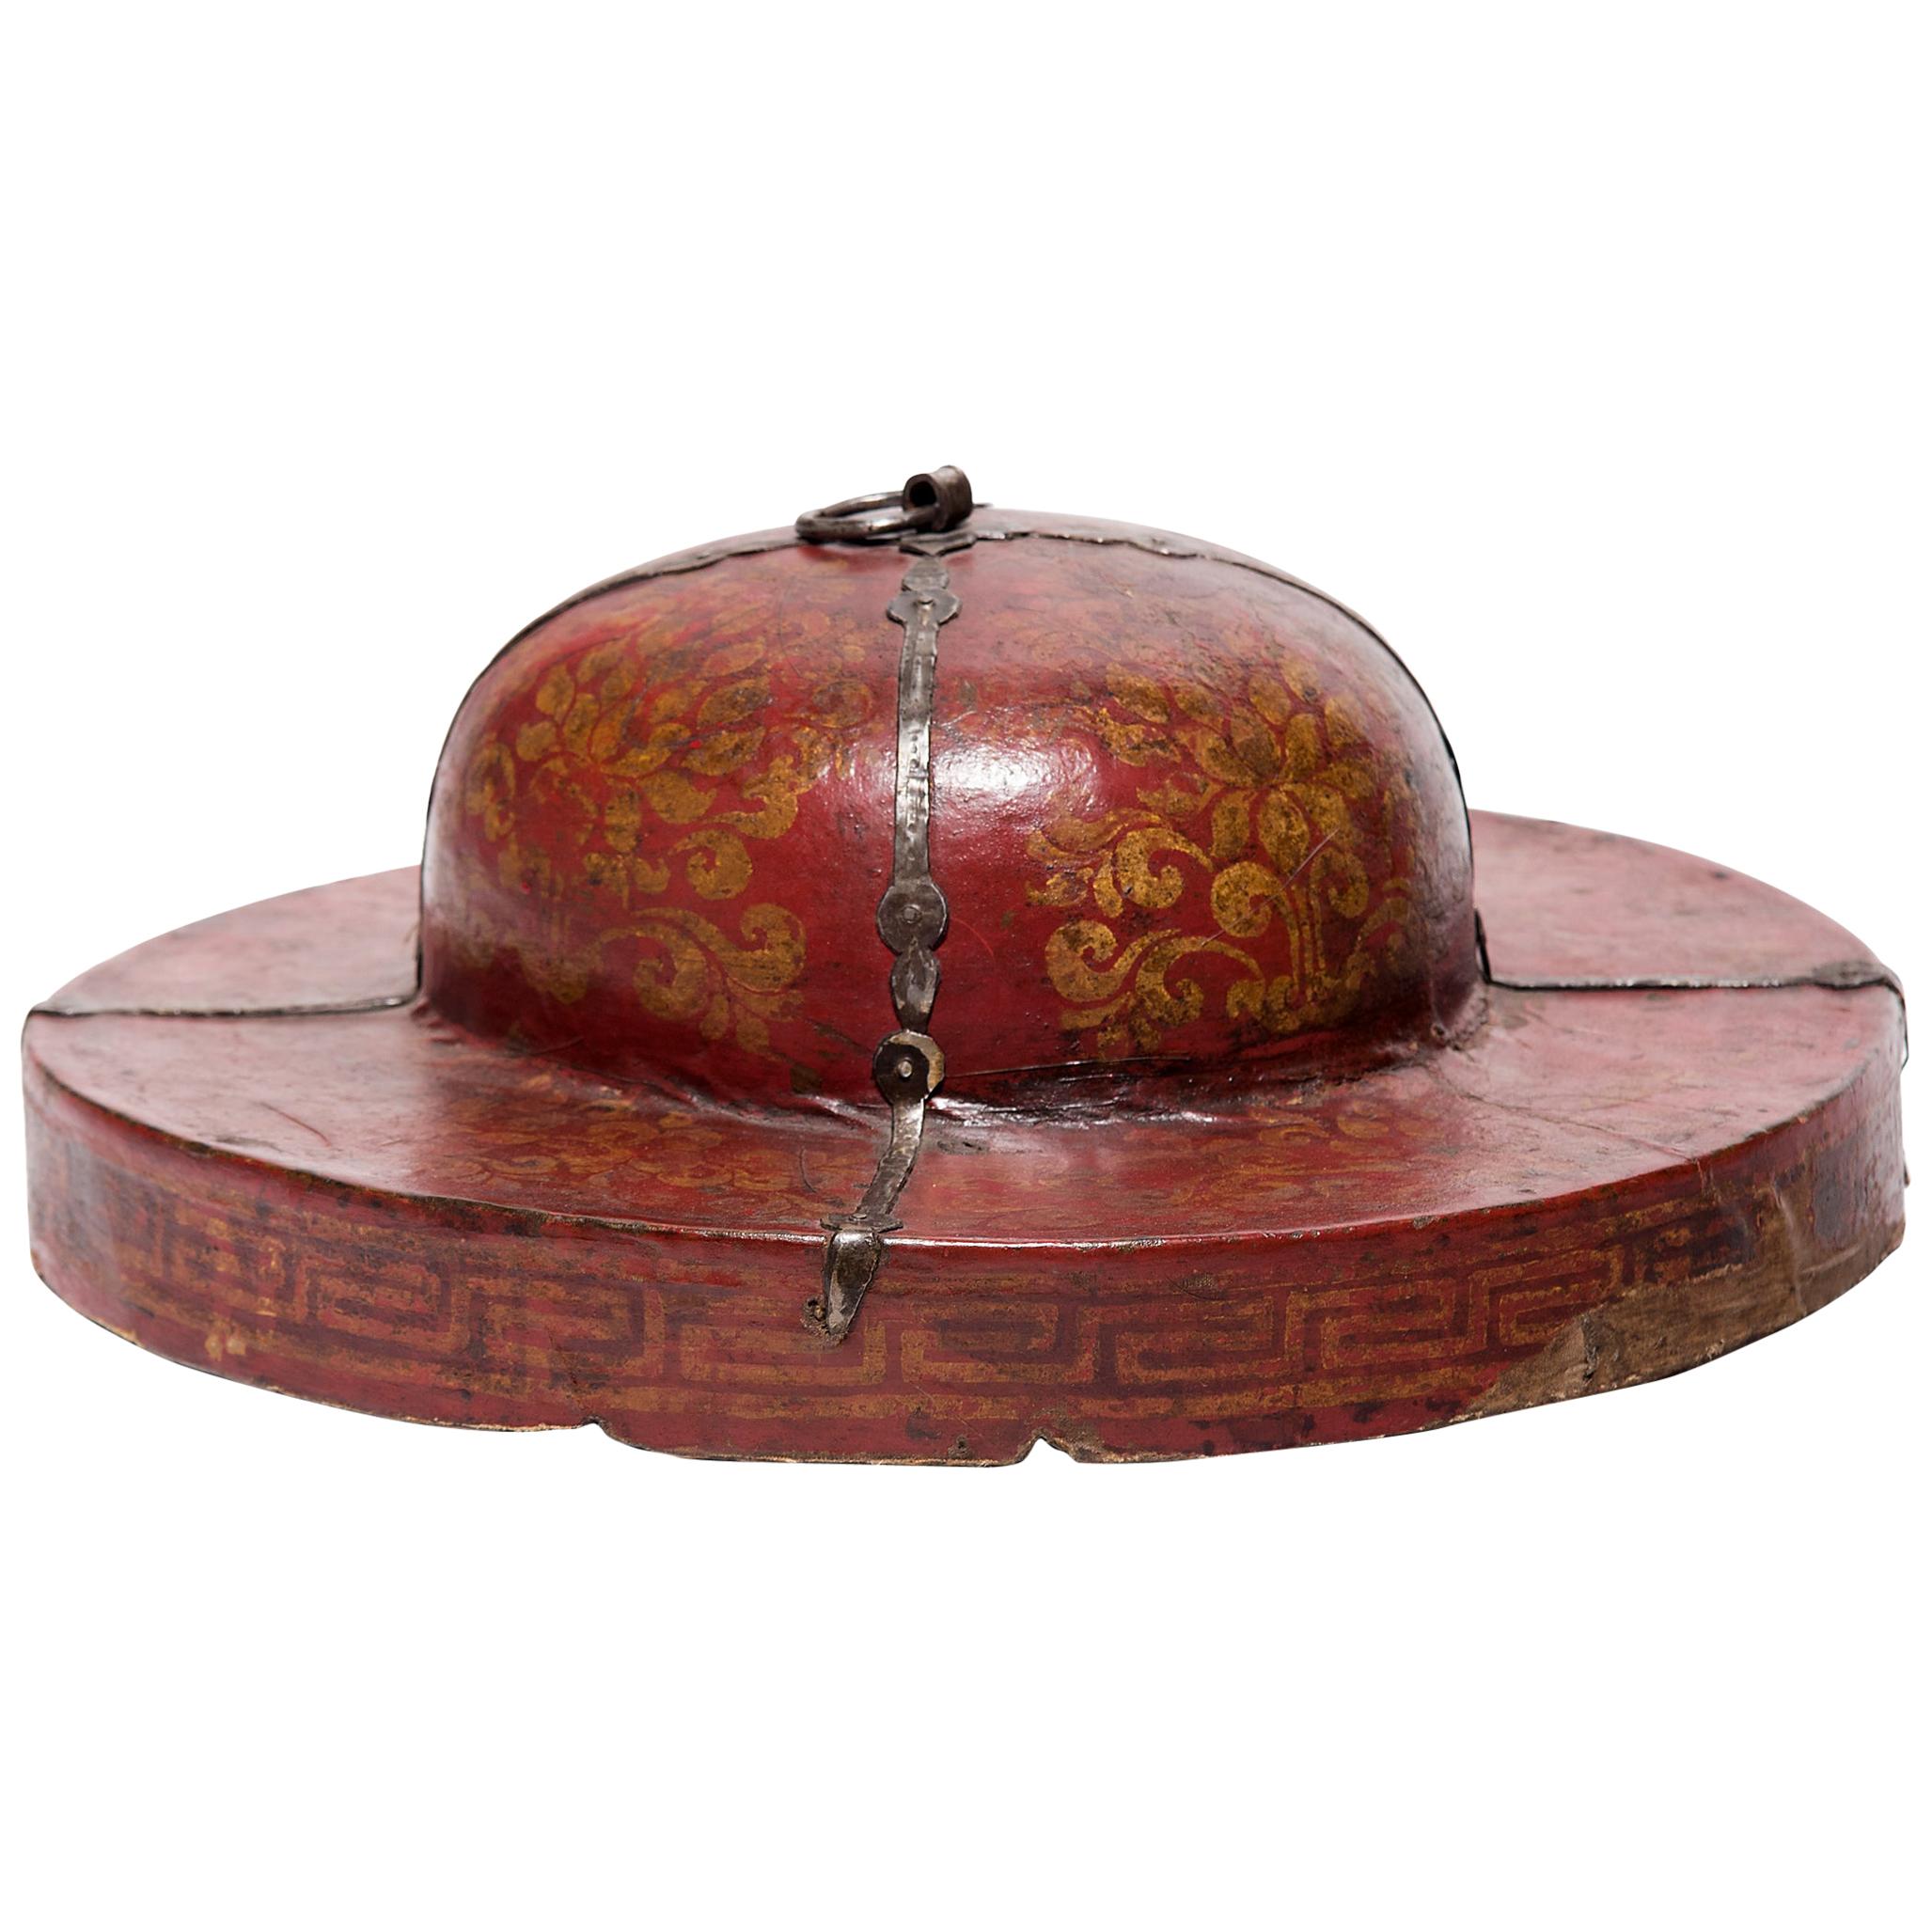 Tibetan Red Lacquer Cymbal Case Lid, circa 1850